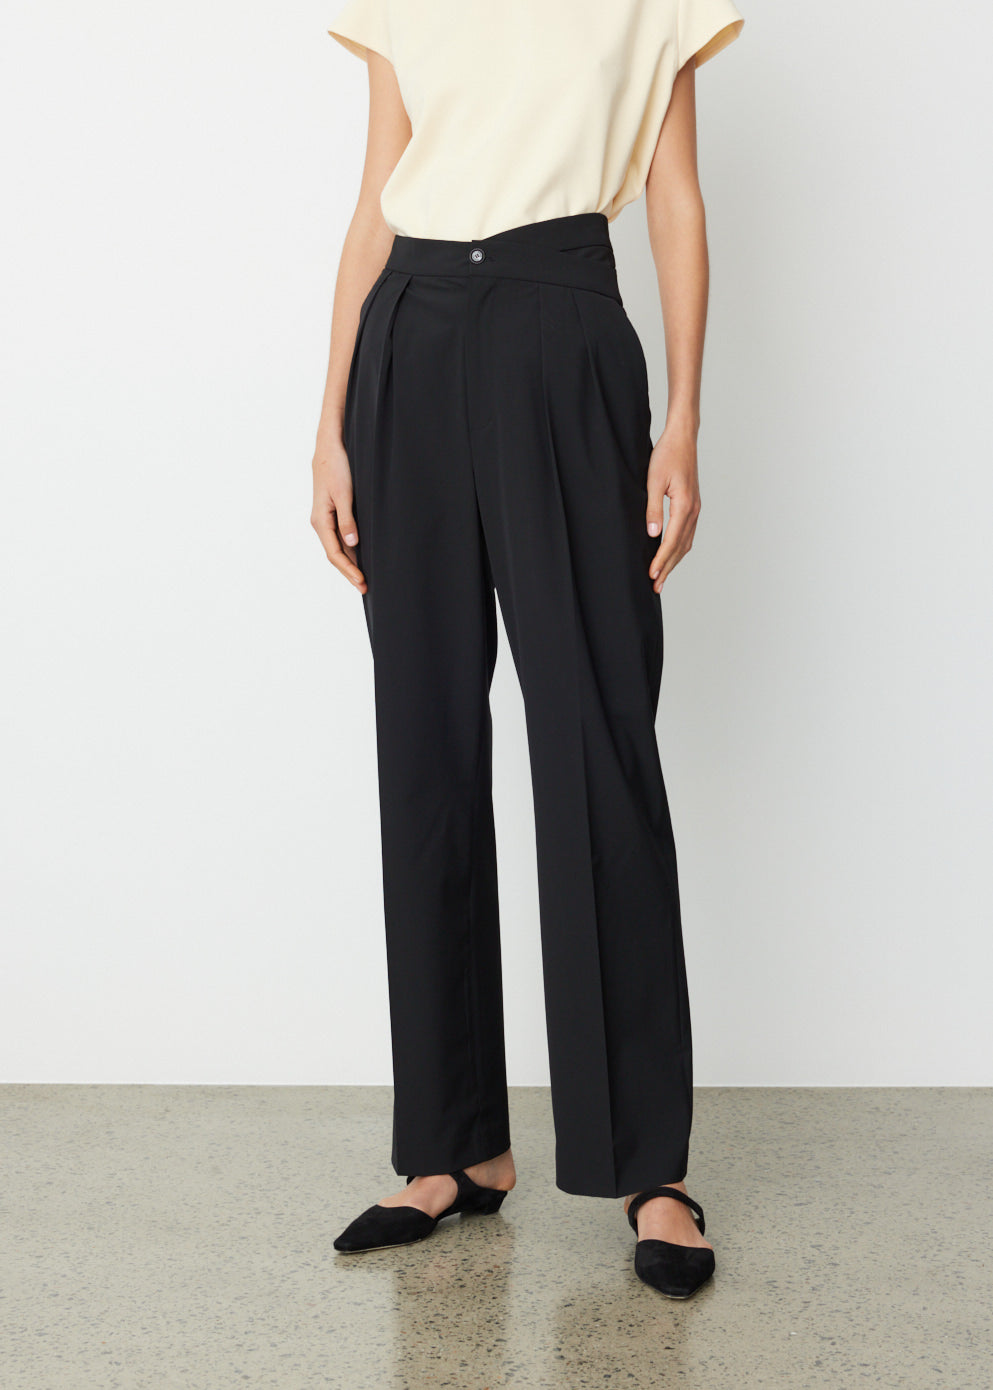 Siona Trousers